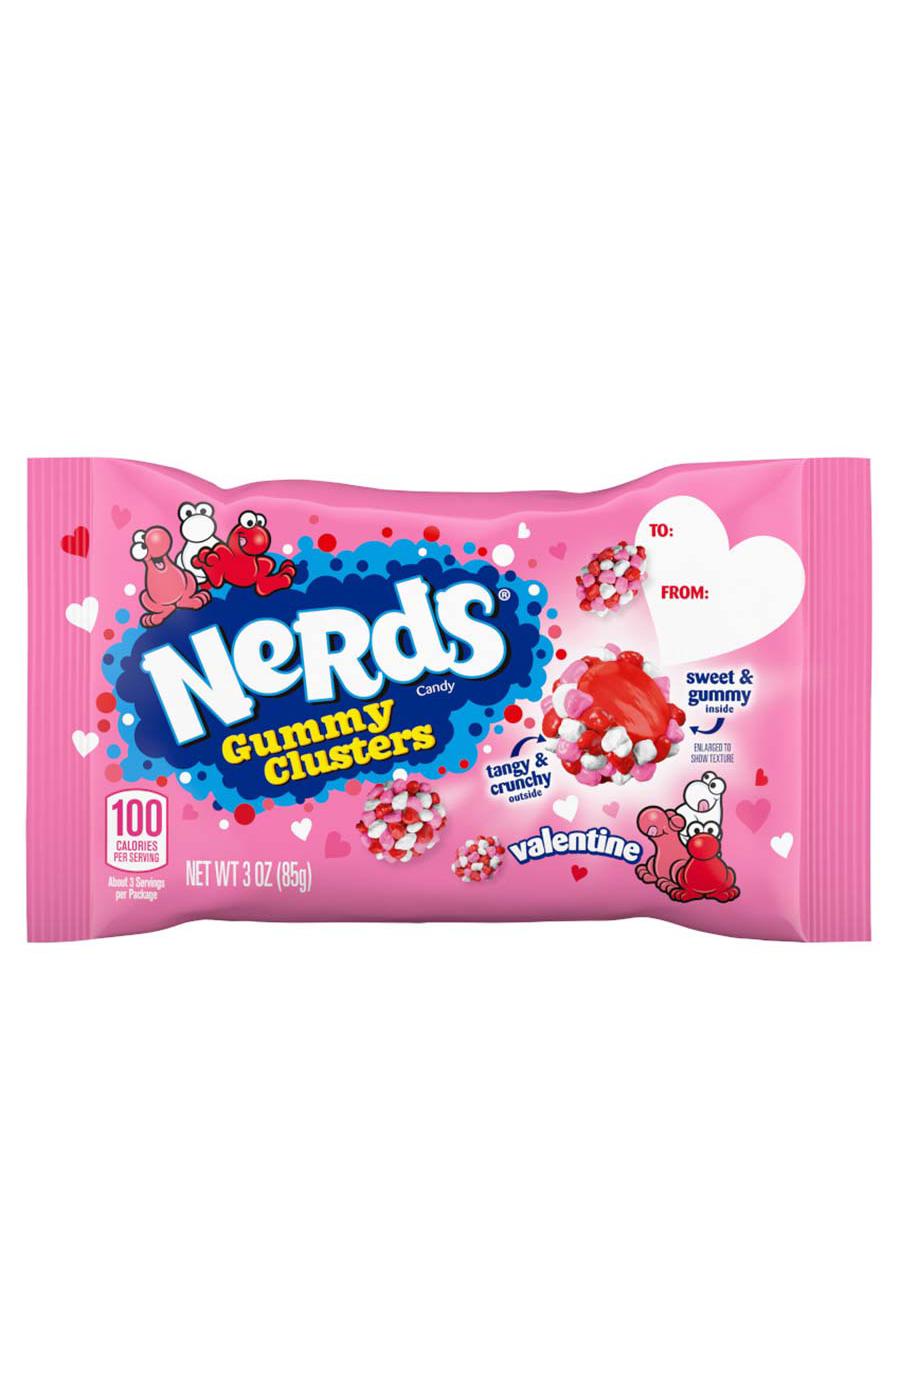 Nerds Gummy Clusters Valentine's Candy; image 1 of 2